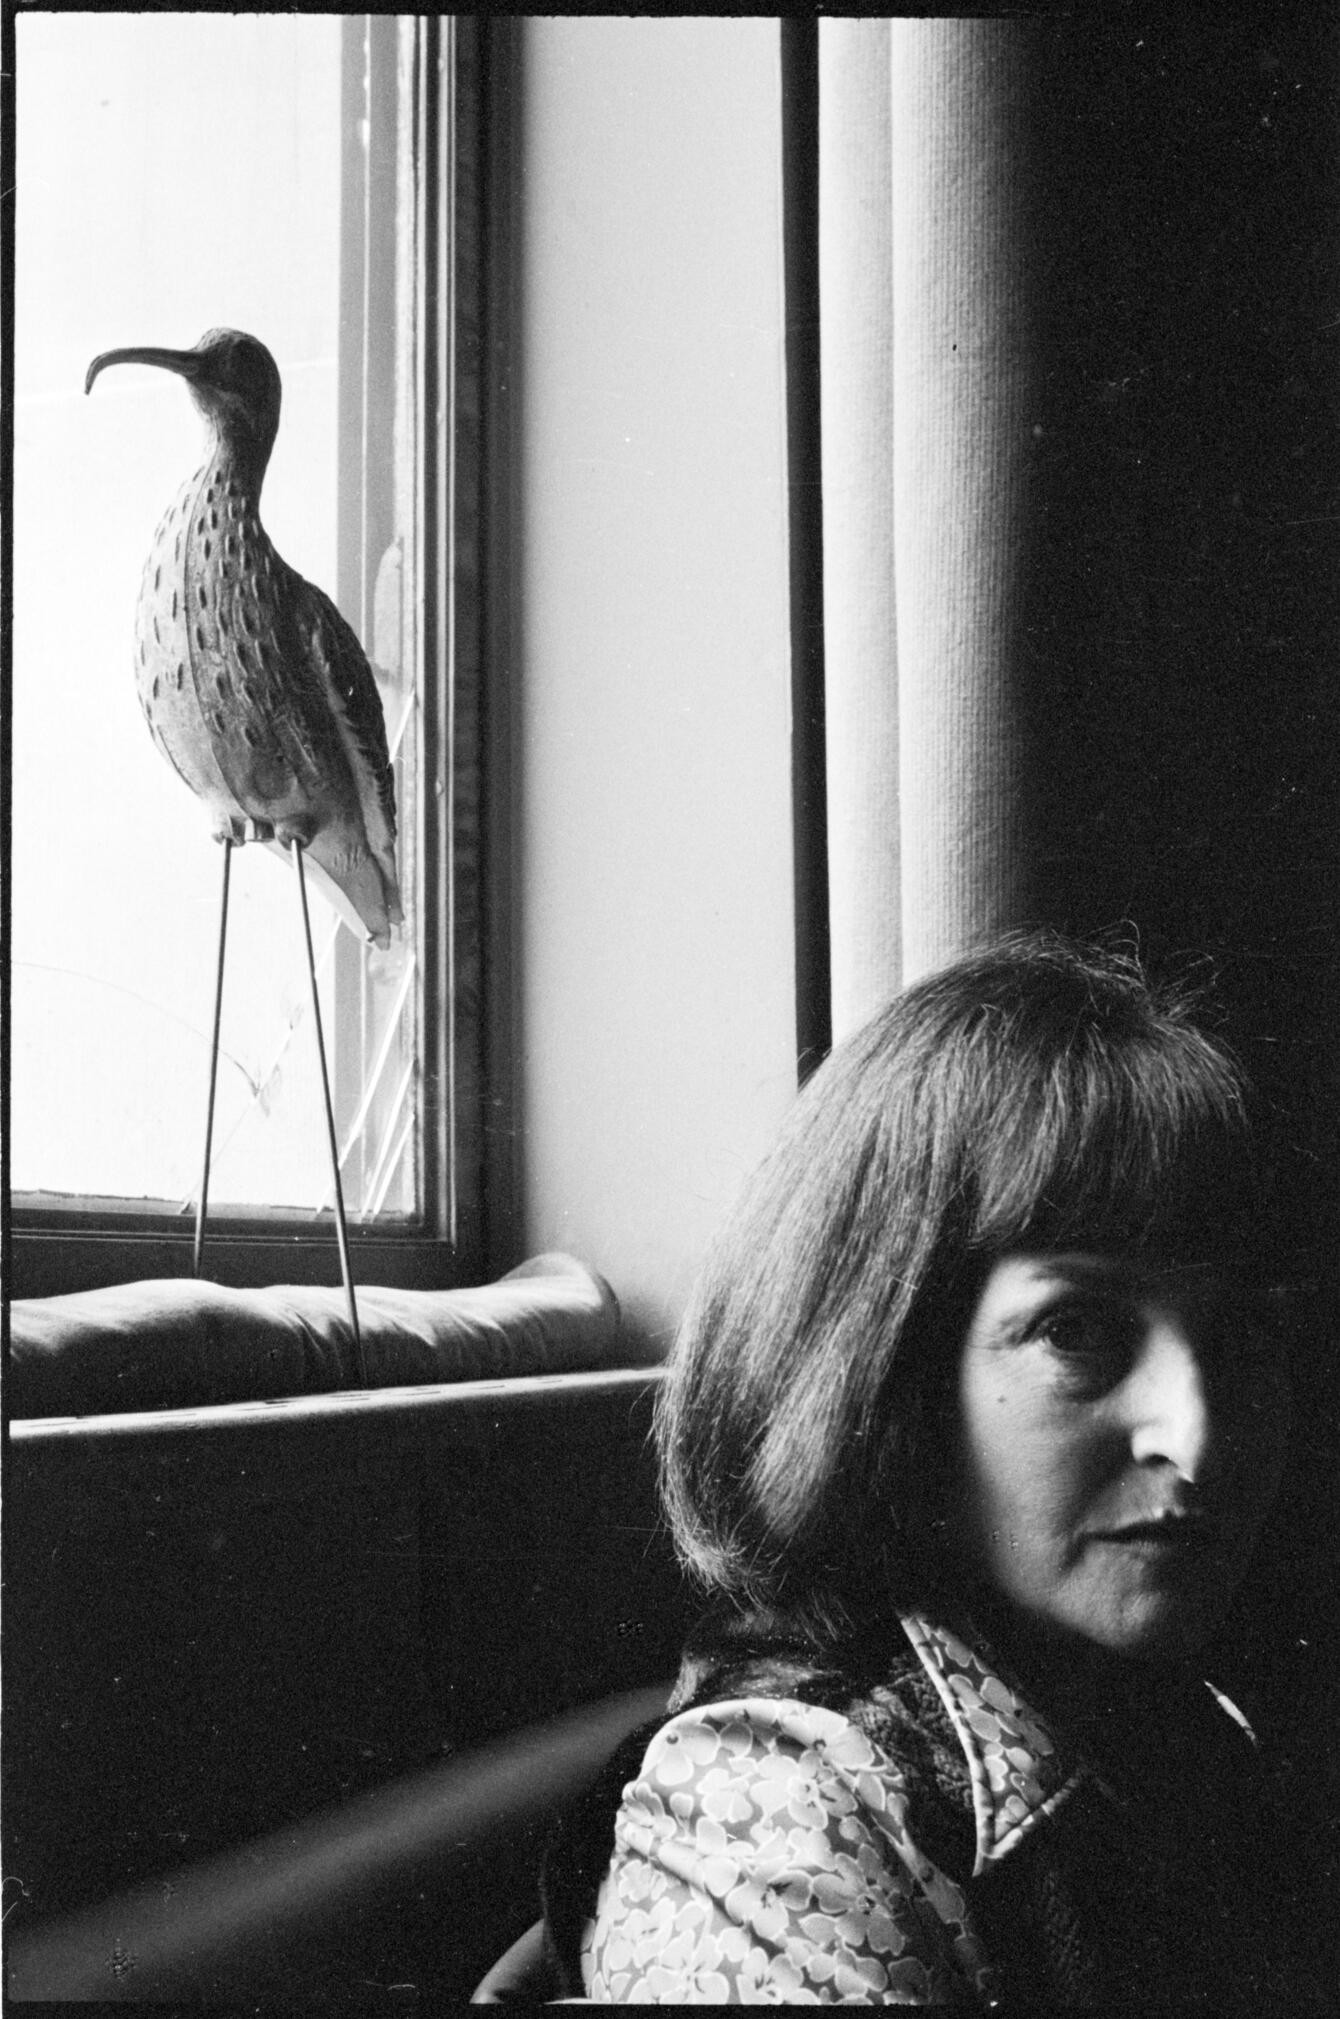 Black and white photo of a woman in profile posing in front of a window. Bright light casts shadows on her face. A bird sculpture is behind her.